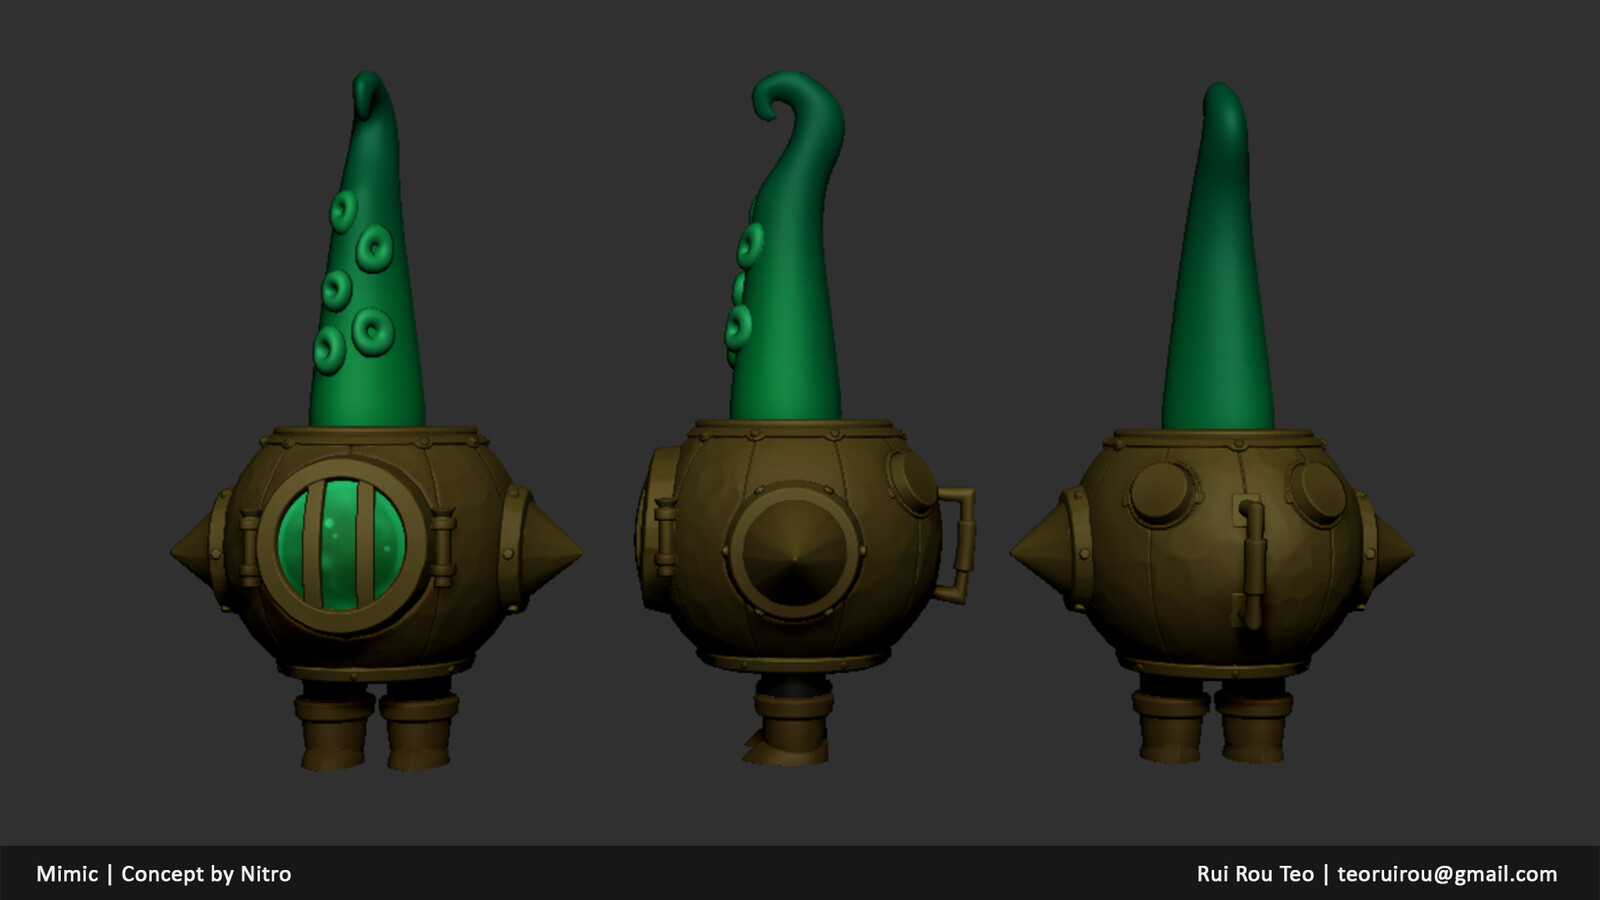 I duplicated the other two tentacles from this one and changed the size and position of the suction cups.